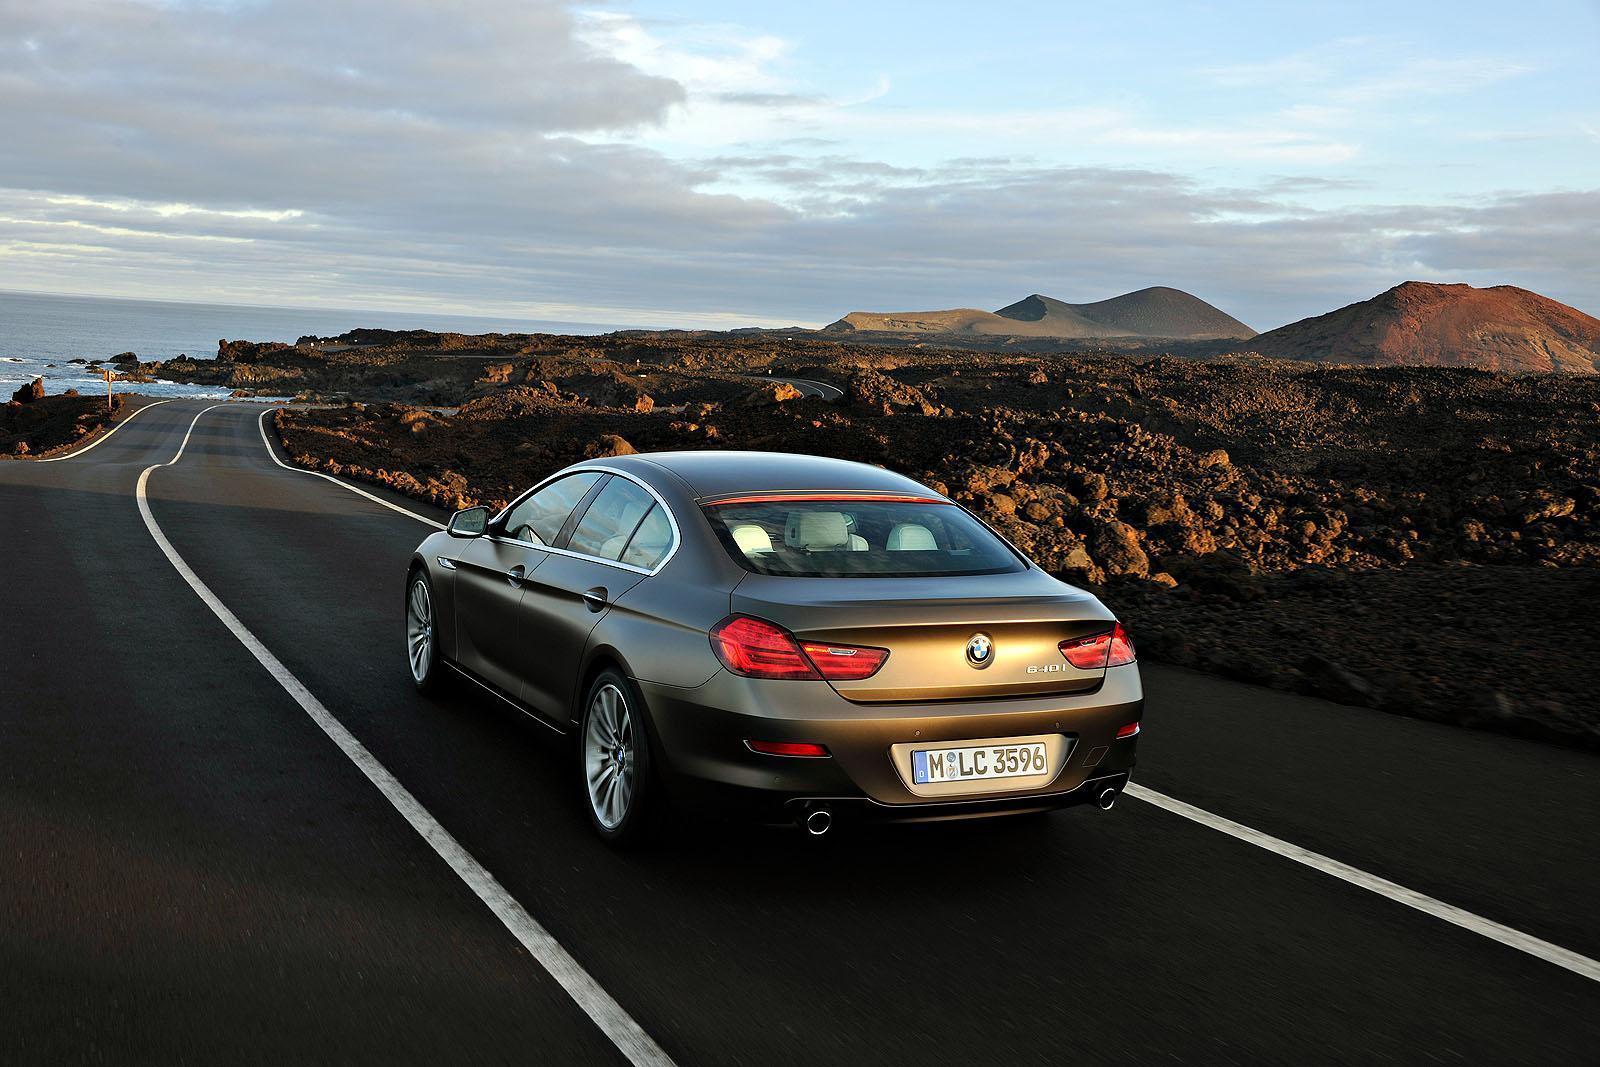 BMW 6 Series Gran Coupe Geneva Debut 2012 Photo 76971 Picture At